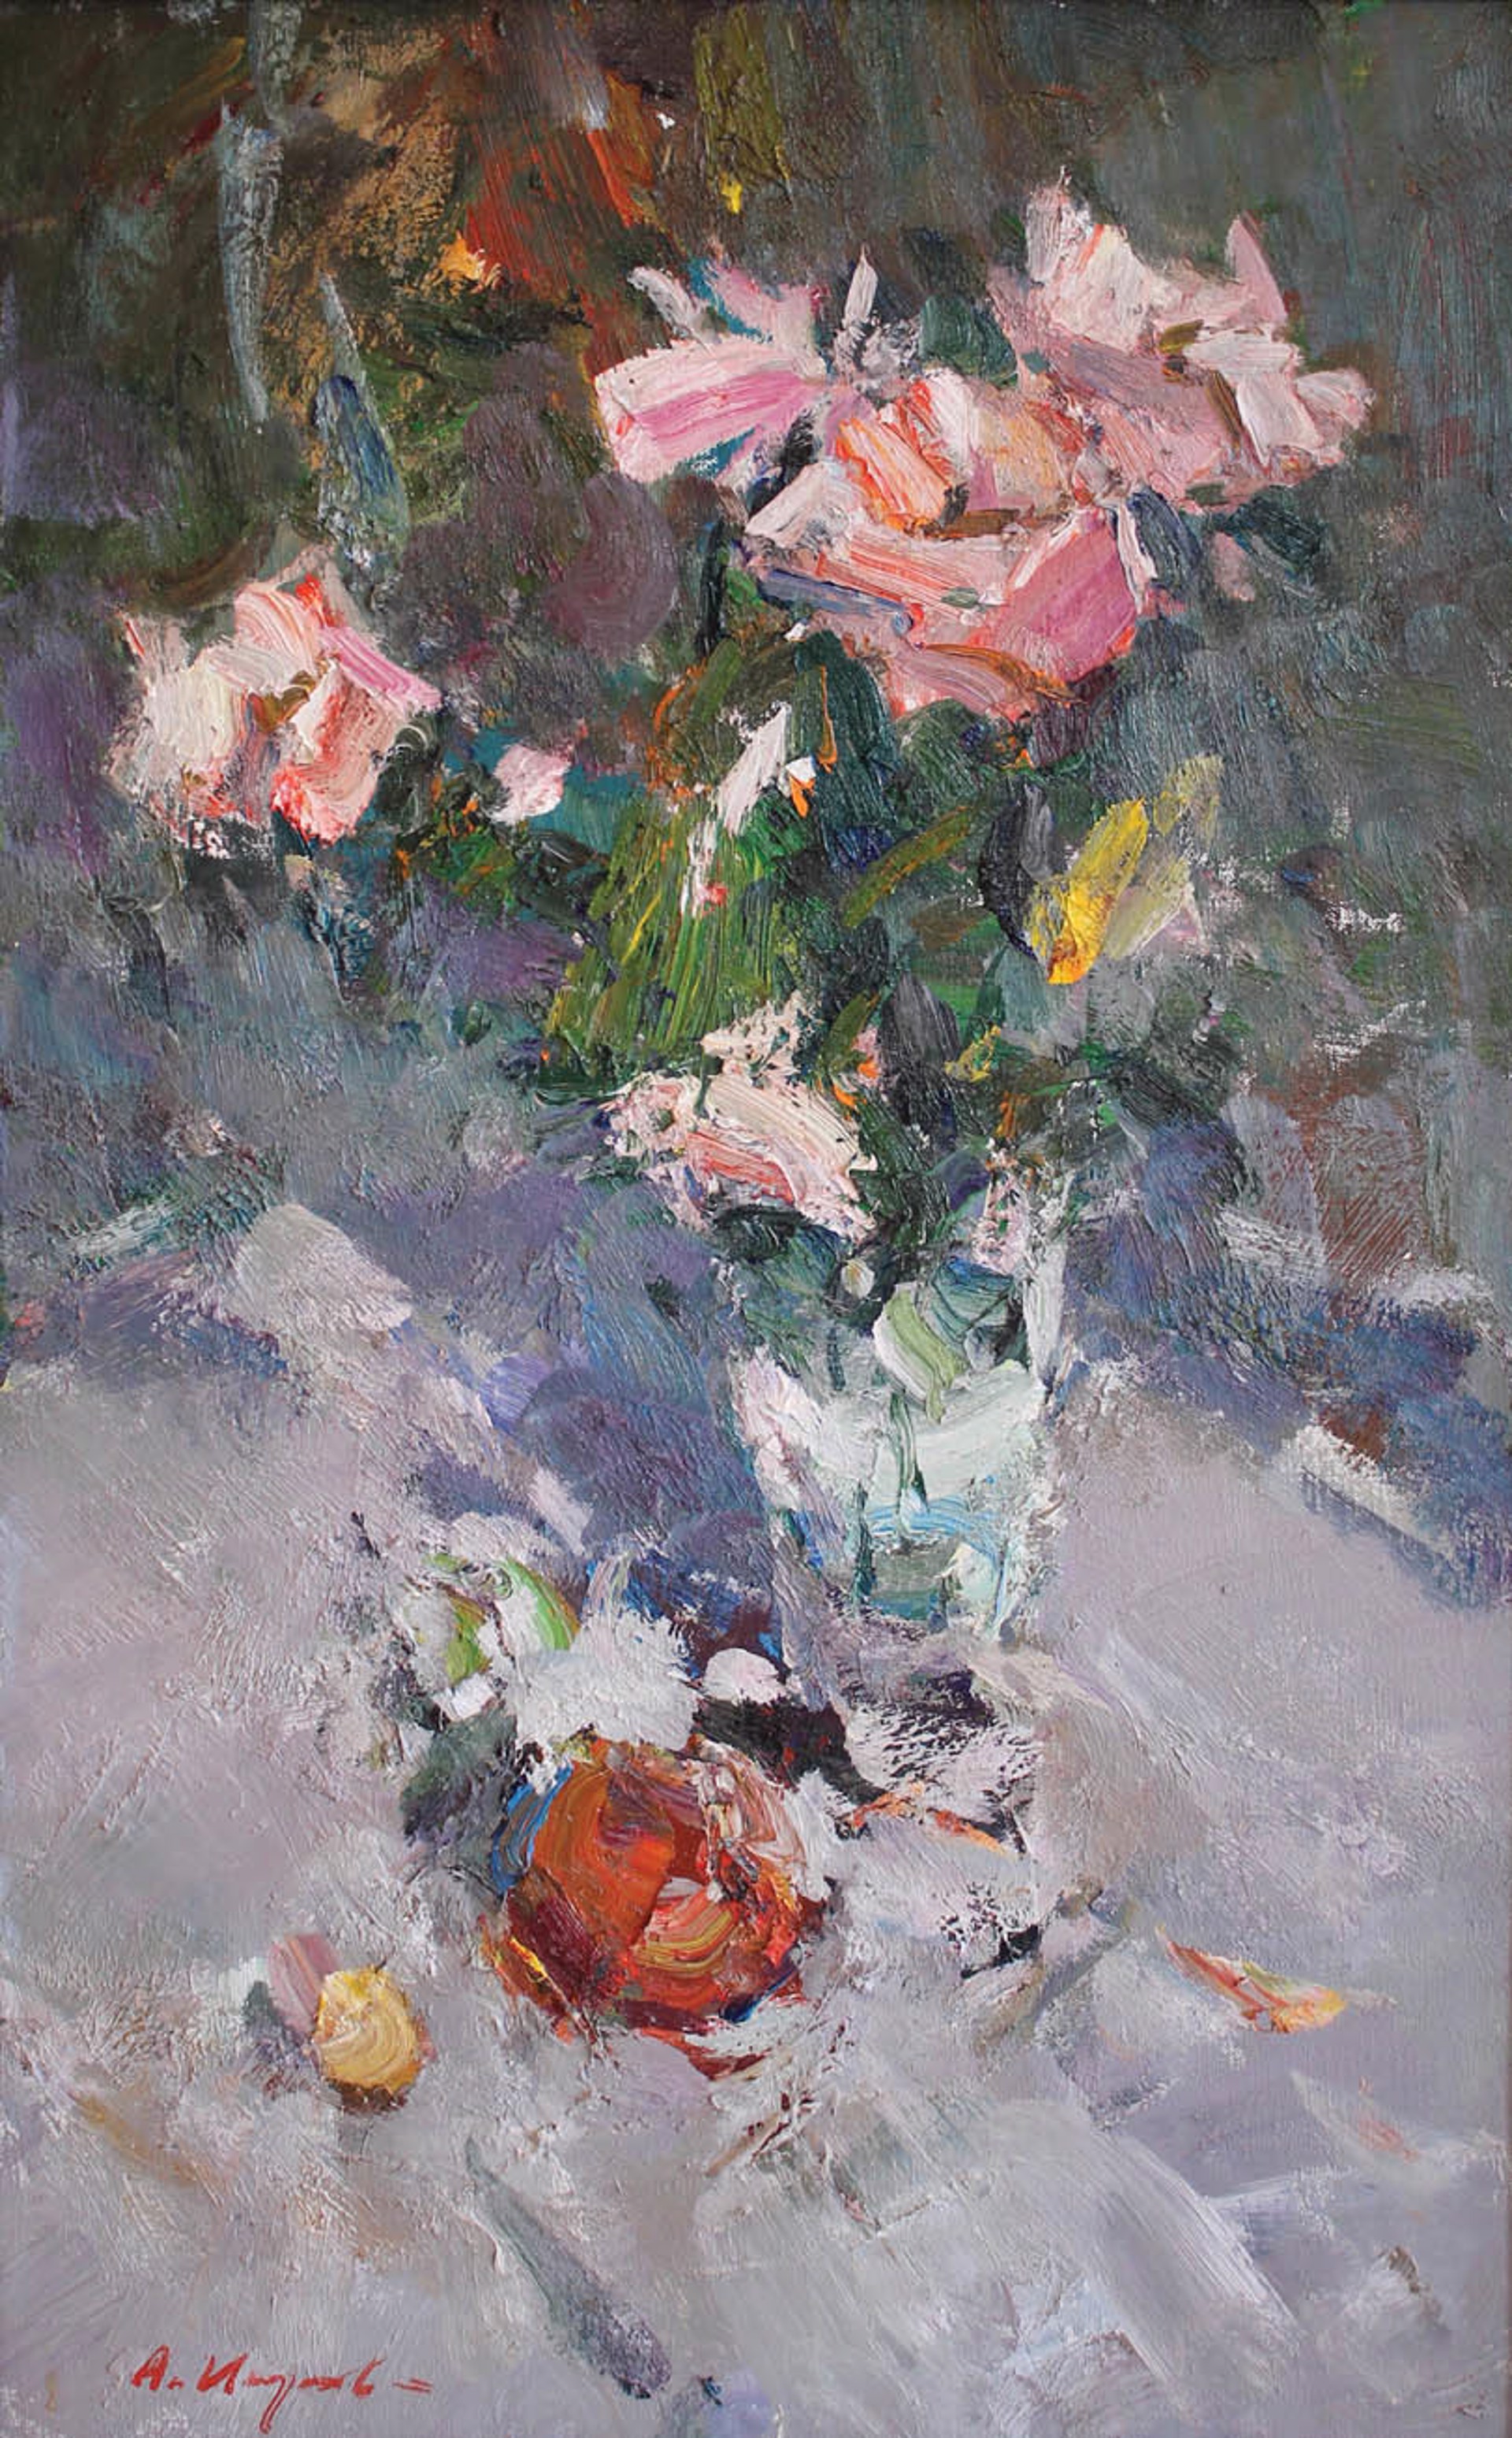 Roses and Peach by Andrey Inozemtsev